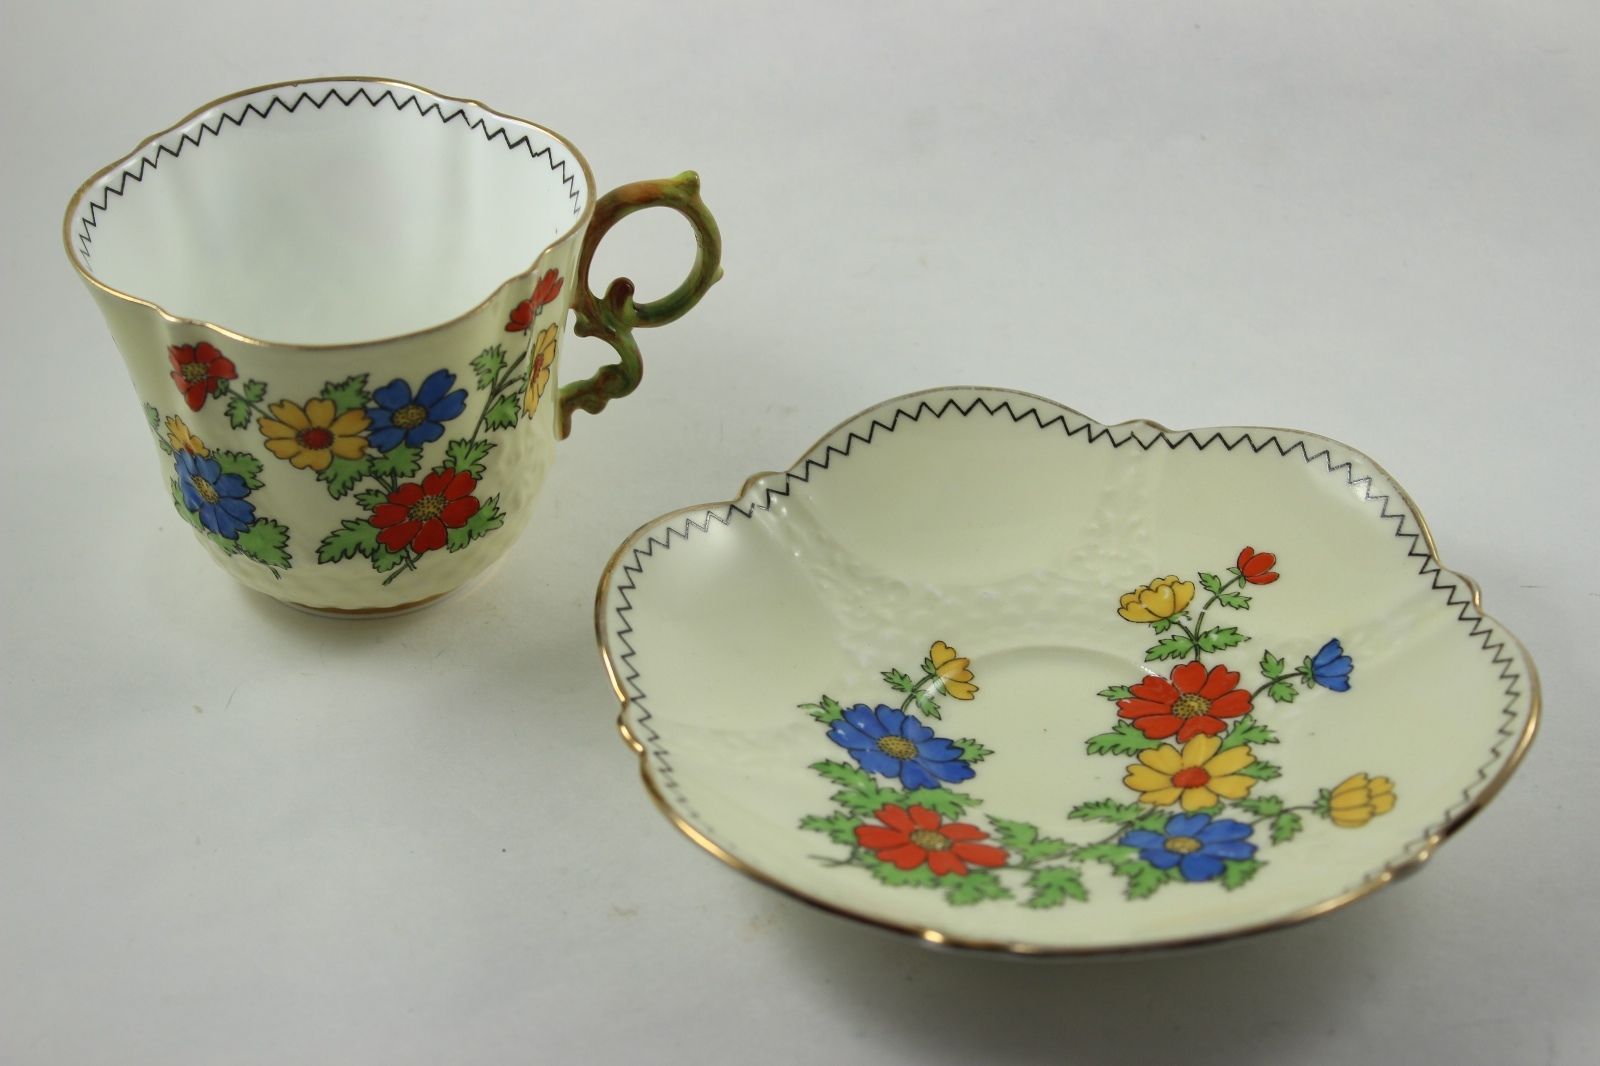 Vintage Aynsley England Tea Cup and Saucer Floral Design China - $55.69